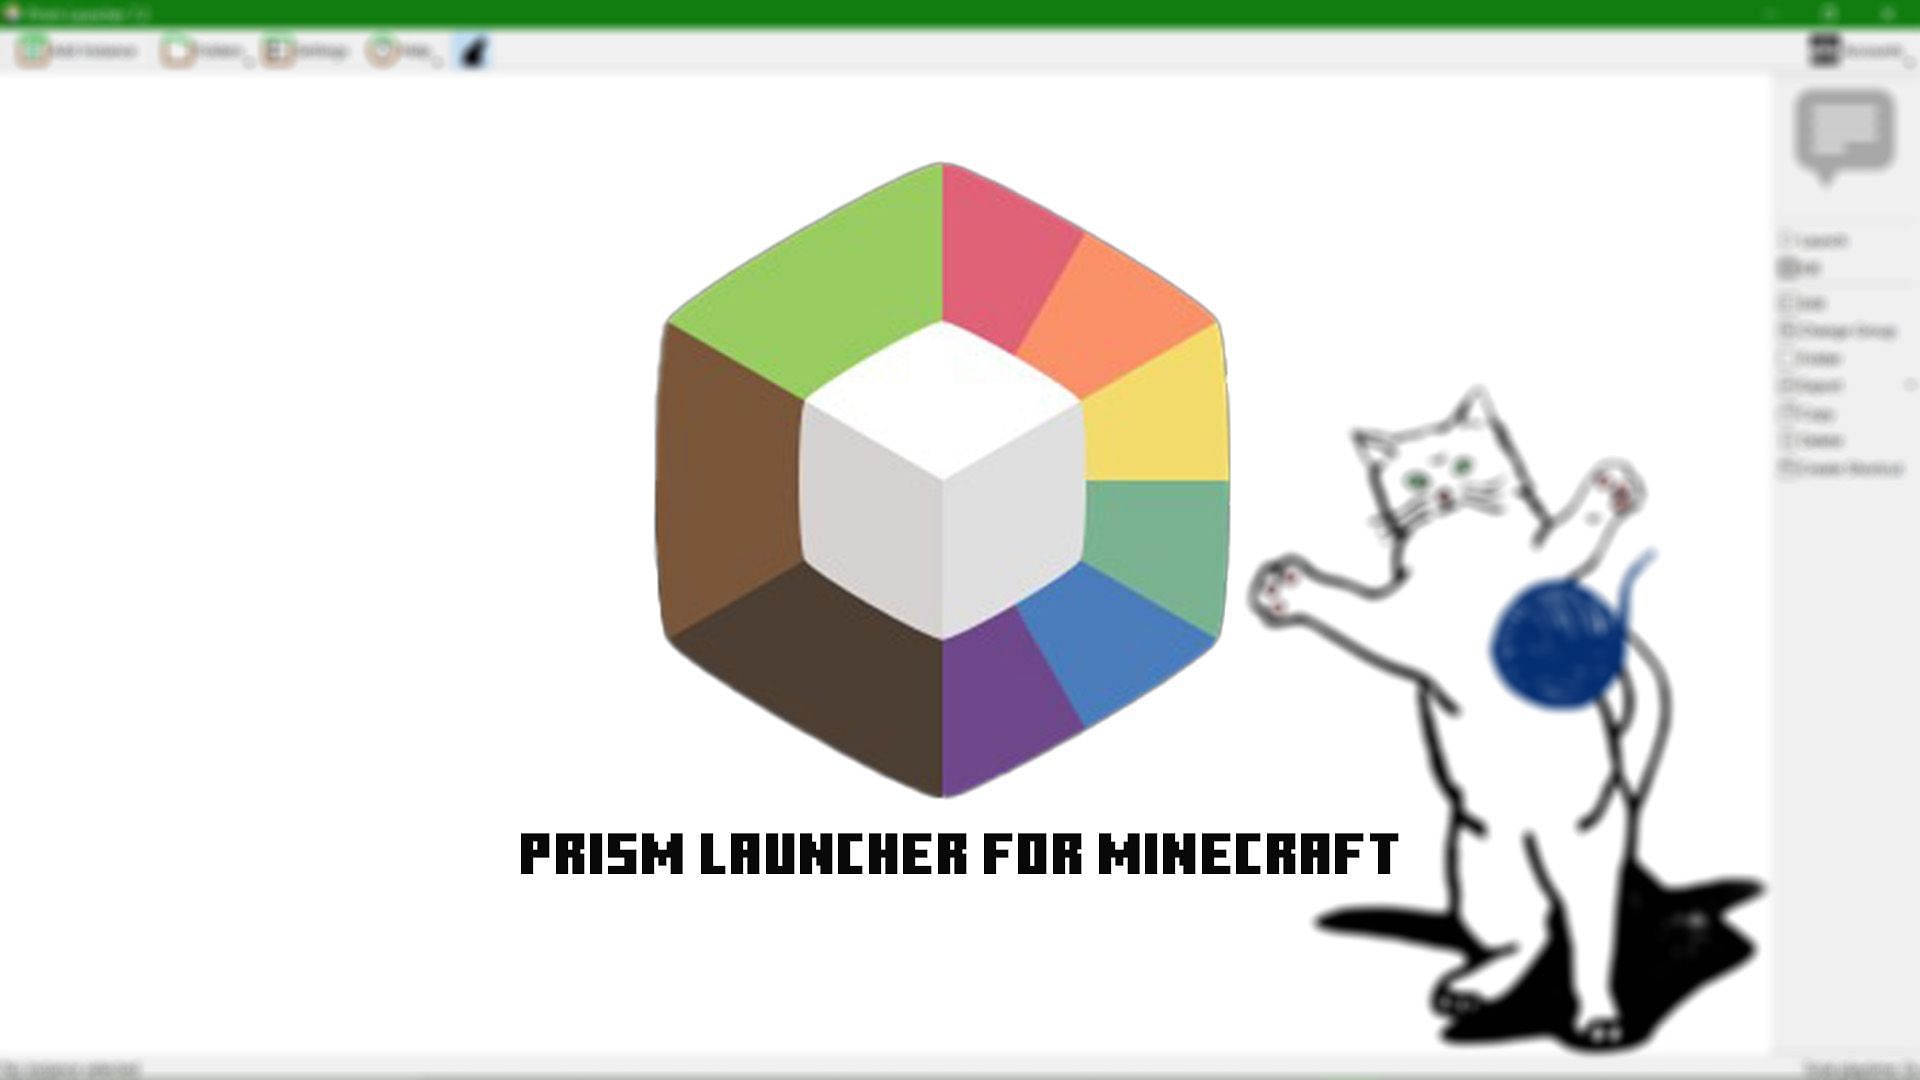 Make modding easier with this amazing launcher for Minecraft (Image via PRISM Launcher)